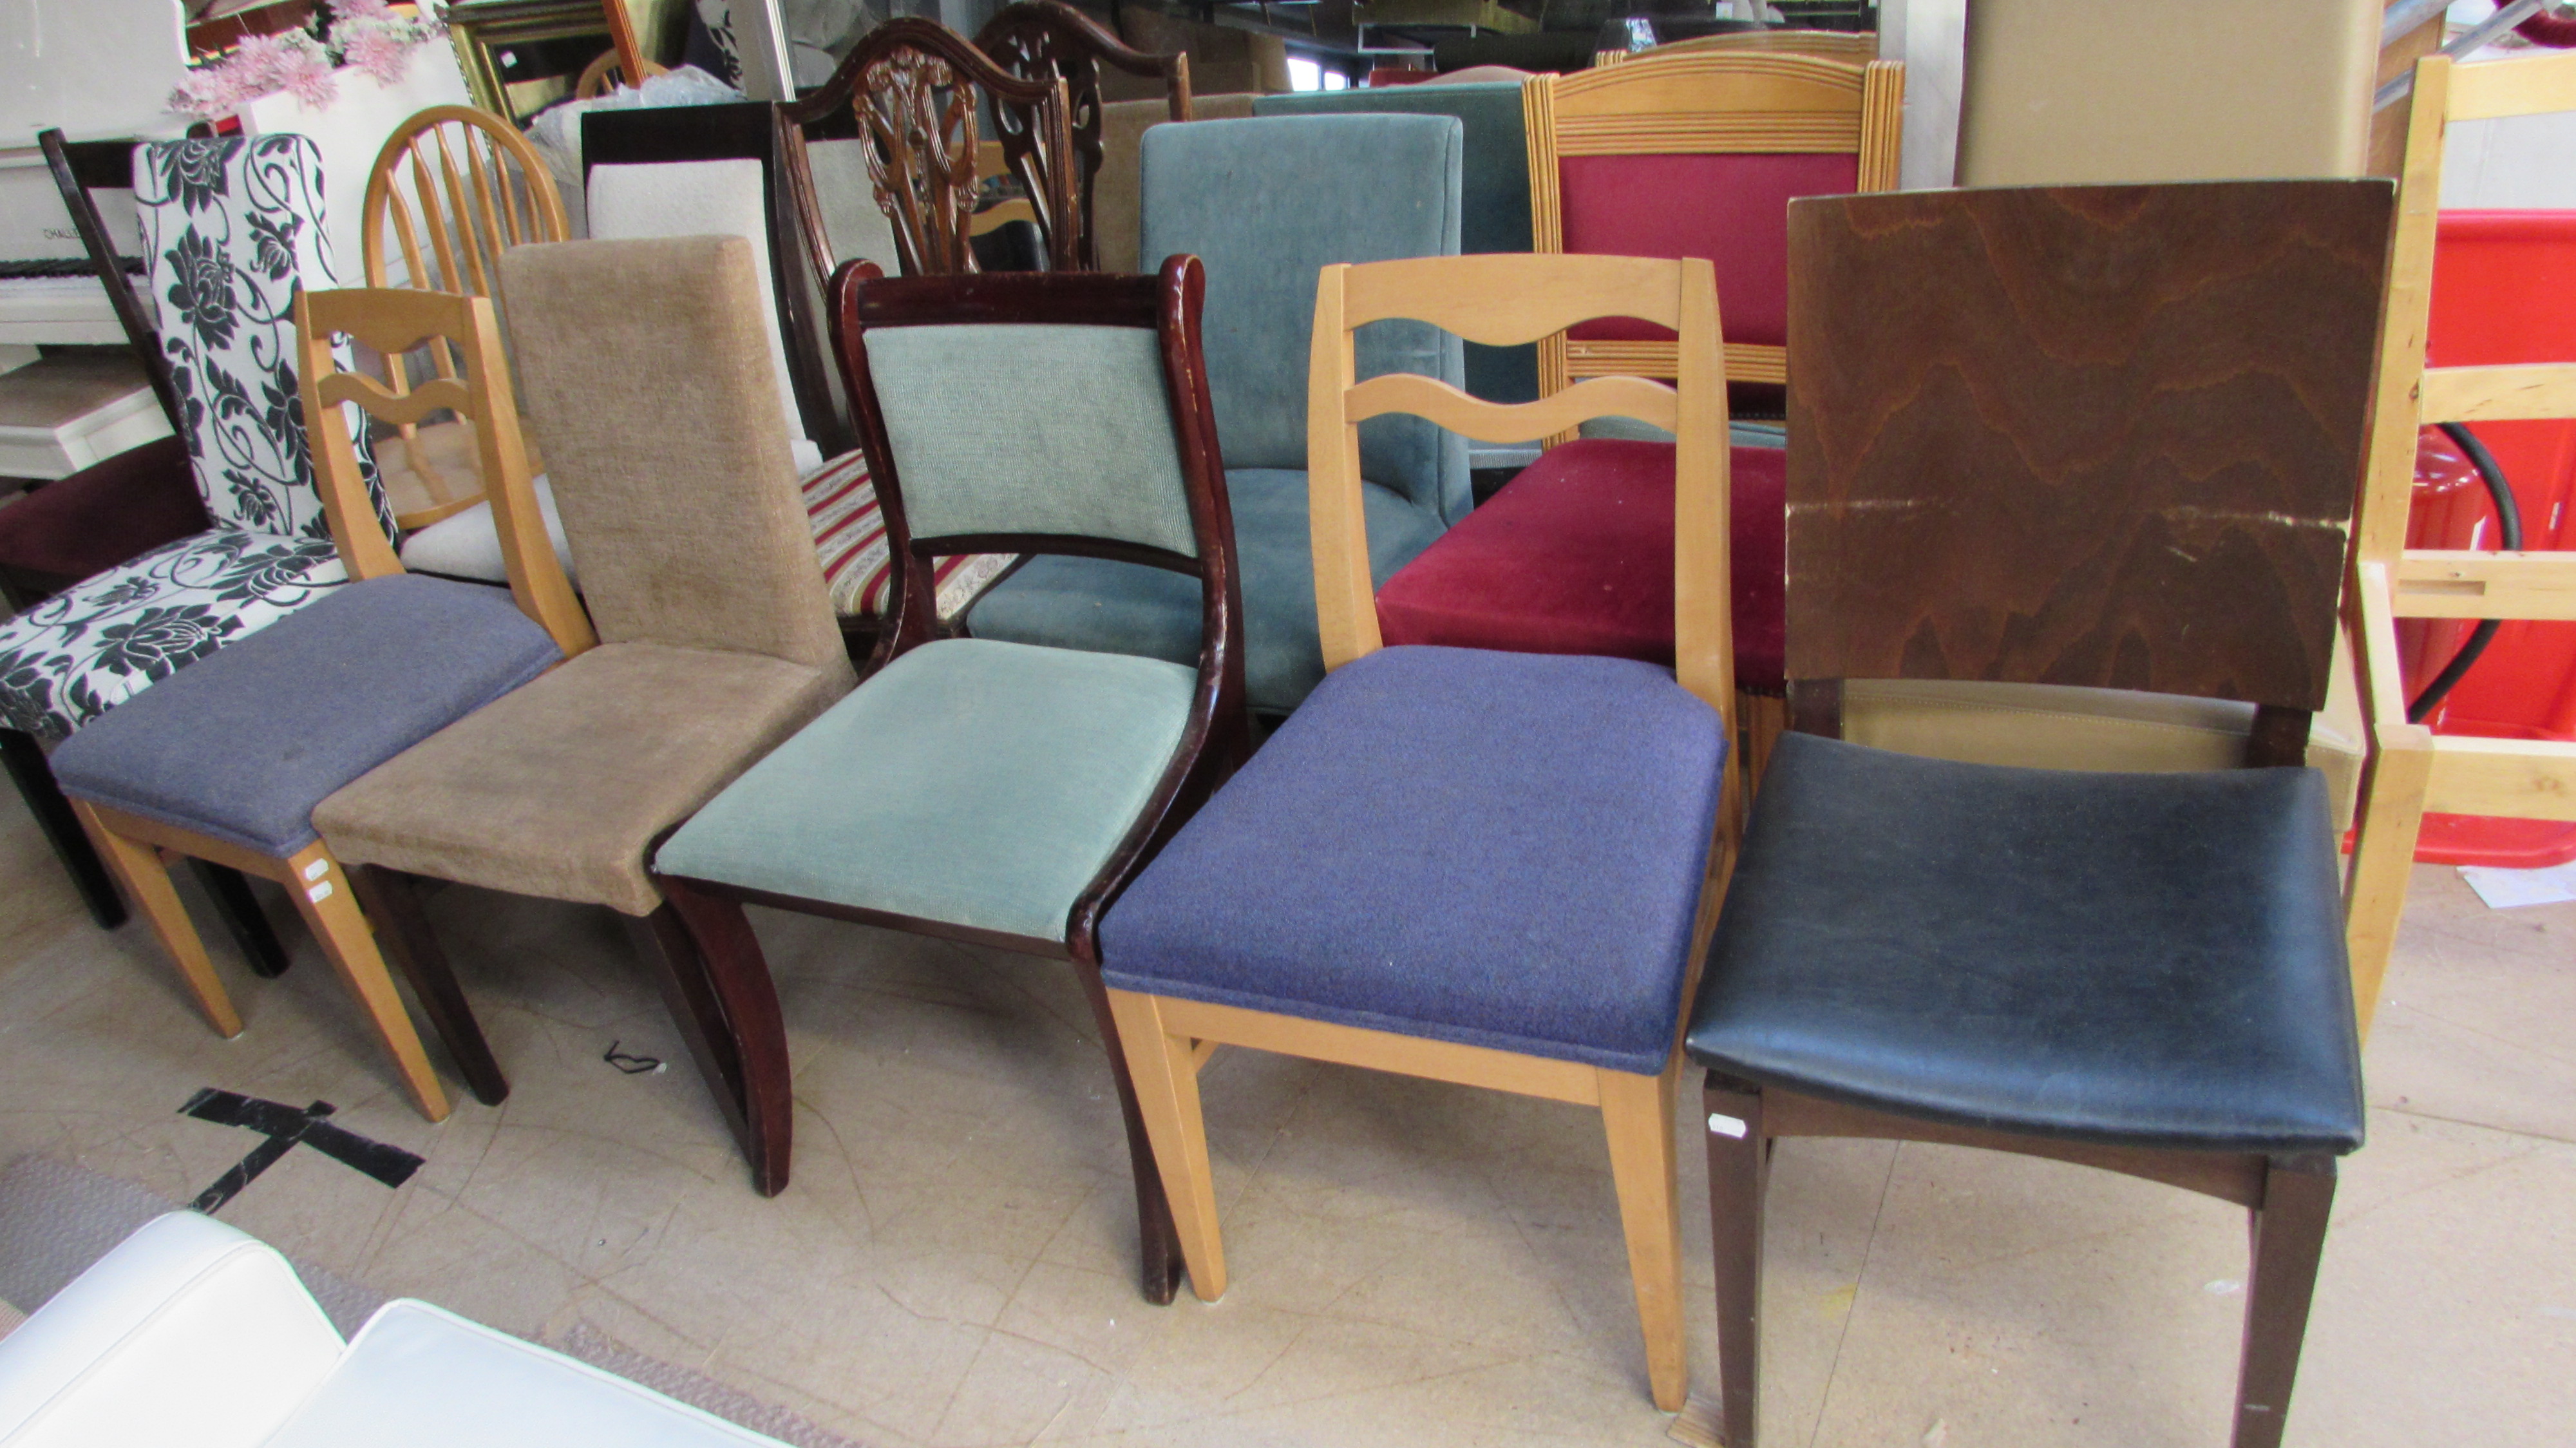 Secondhand Chairs And Tables Pub And Bar Furniture 13x